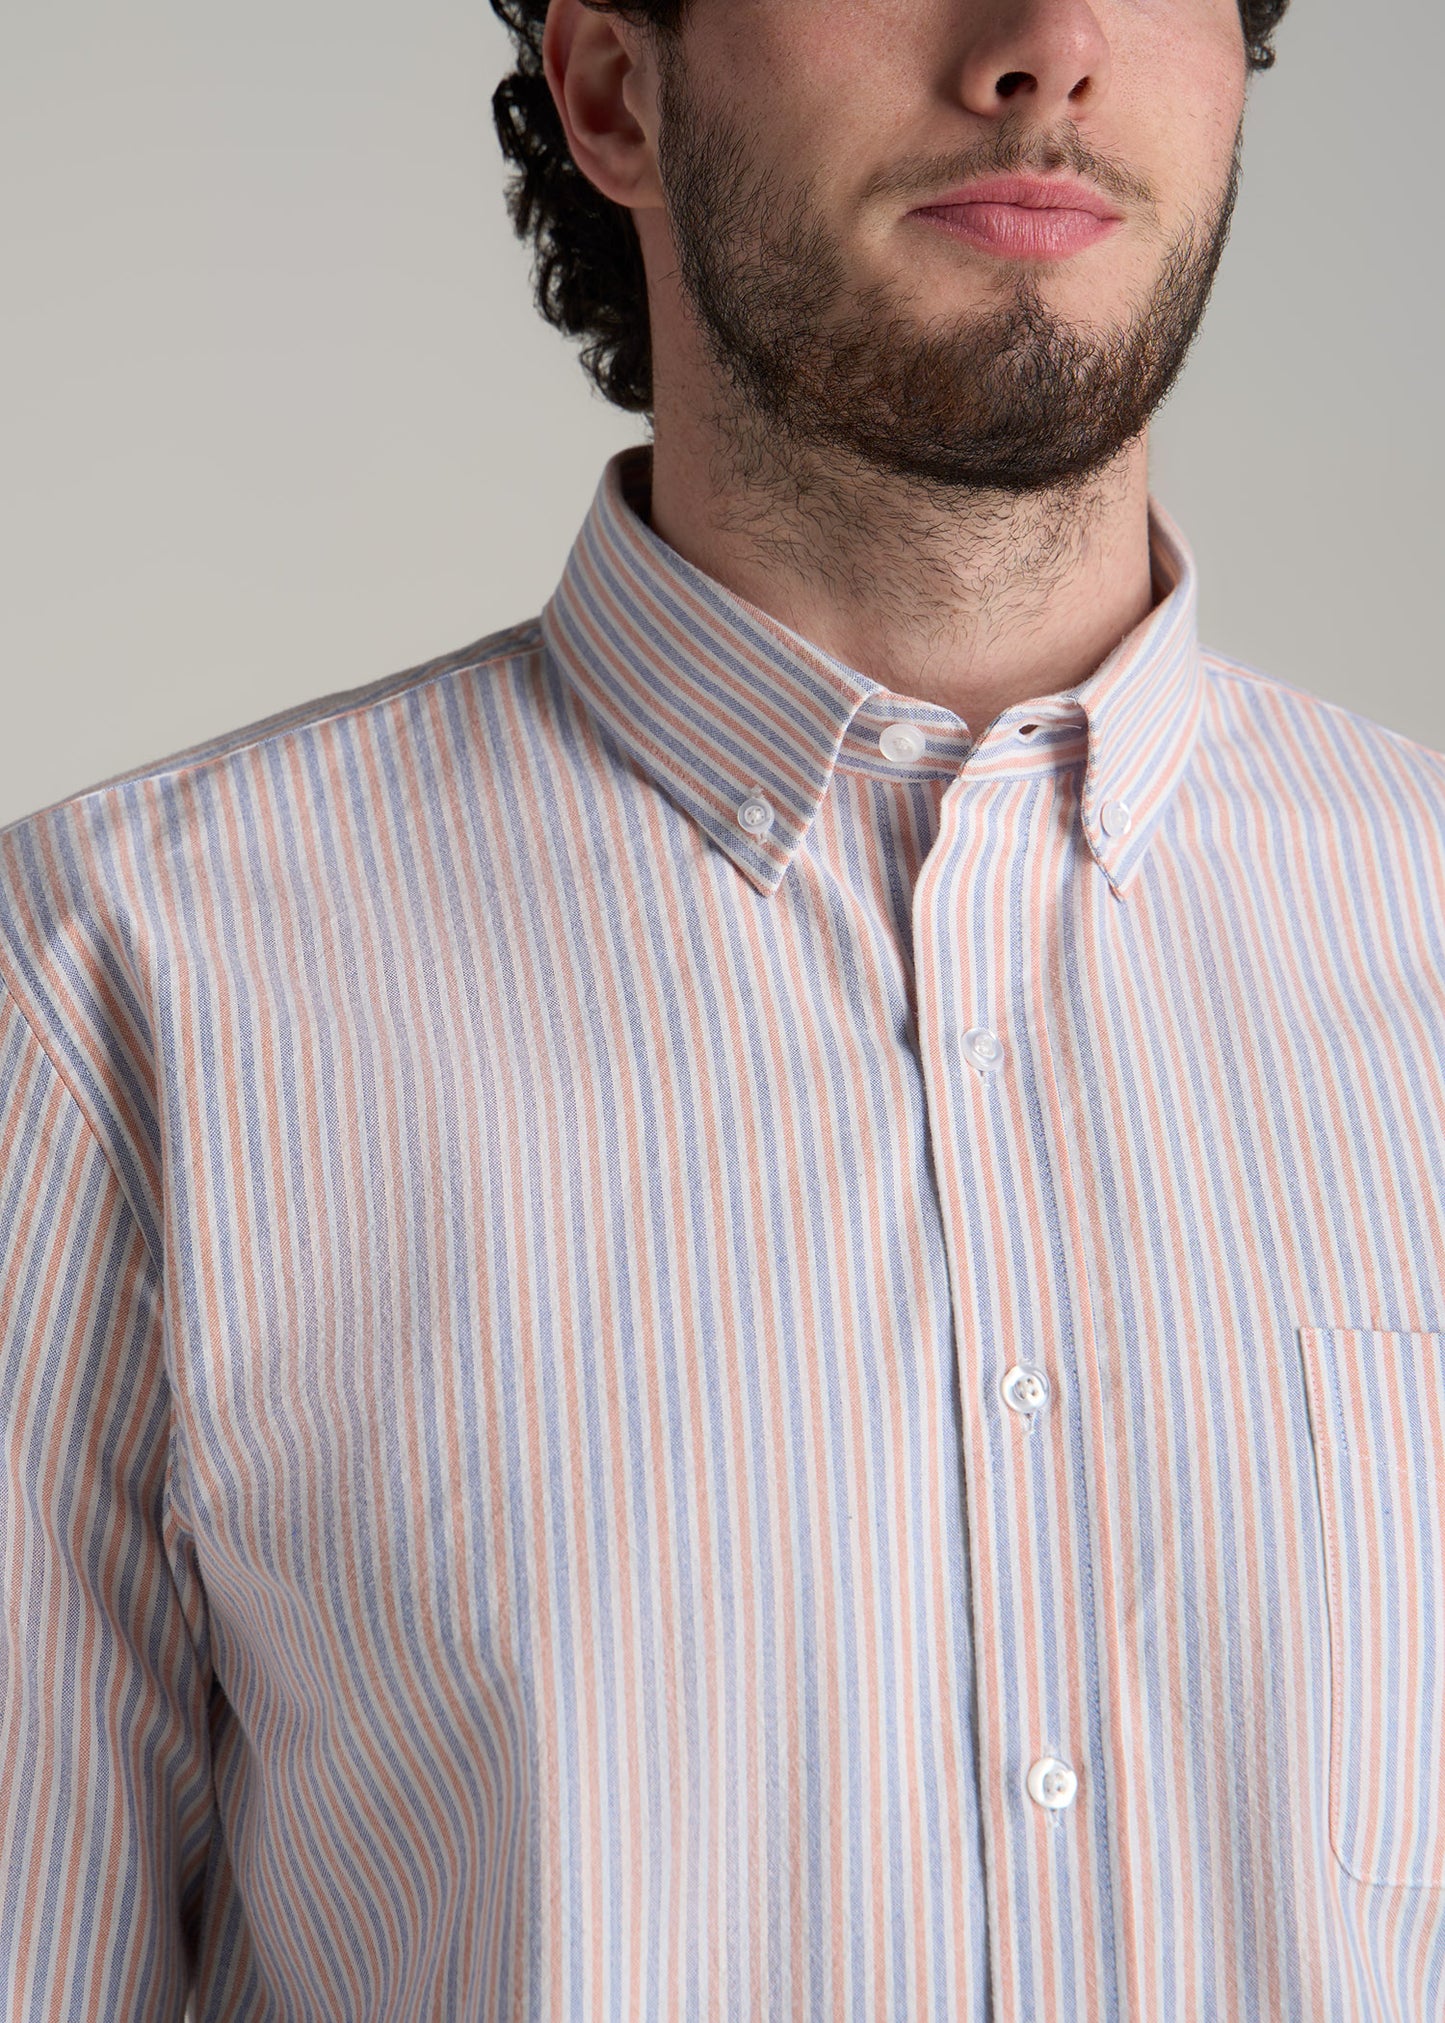 Washed Oxford Shirt for Tall Men in Apricot and Blue Multi Stripe